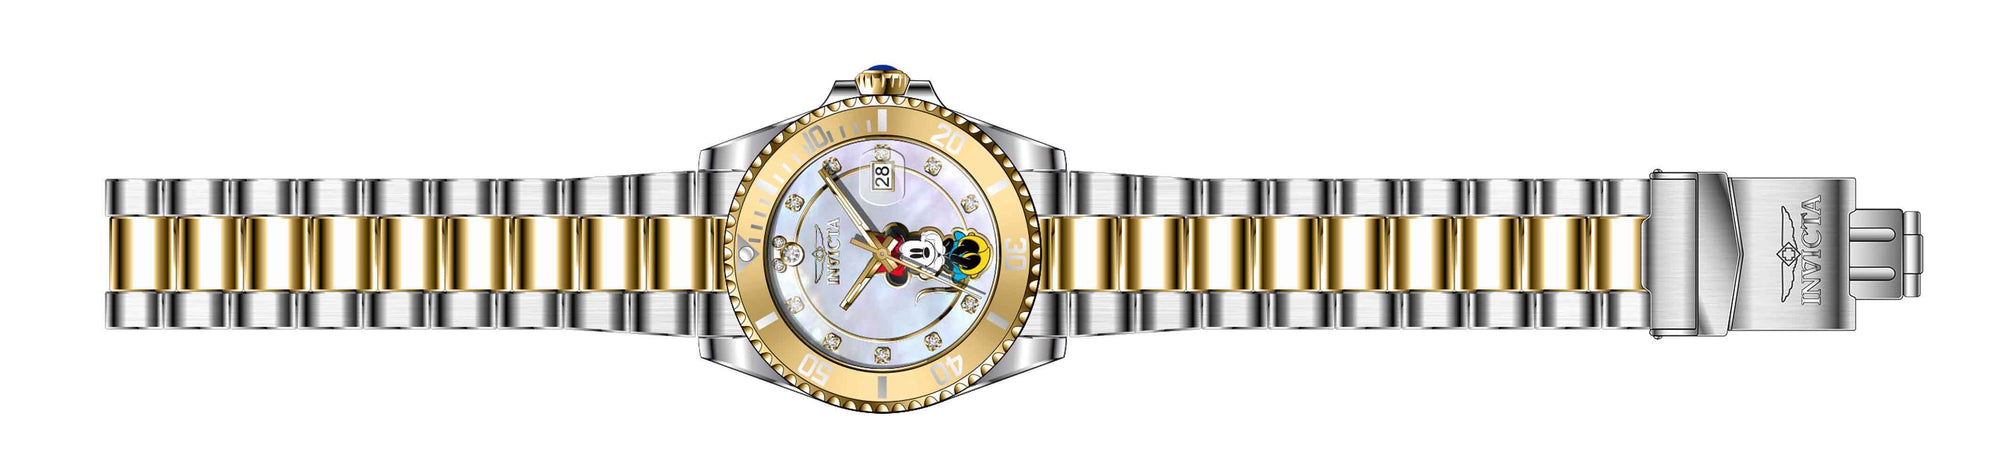 Band for Invicta Disney Limited Edition Minnie Mouse Lady 41207